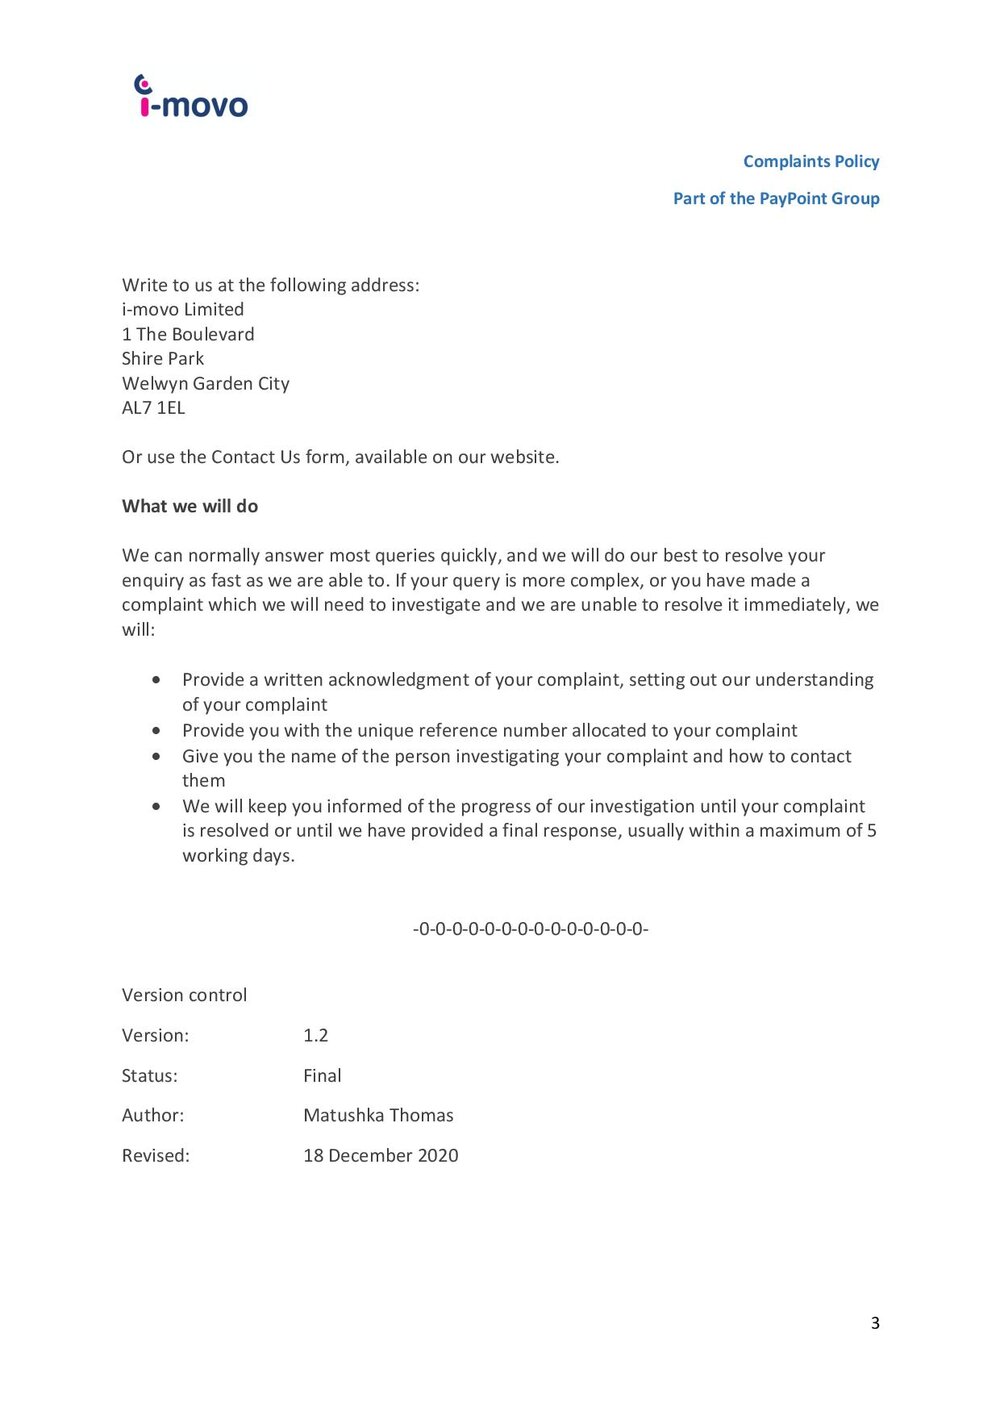 i-movo Complaints Policy - v1.2. 18.12.2020-page-003.jpg